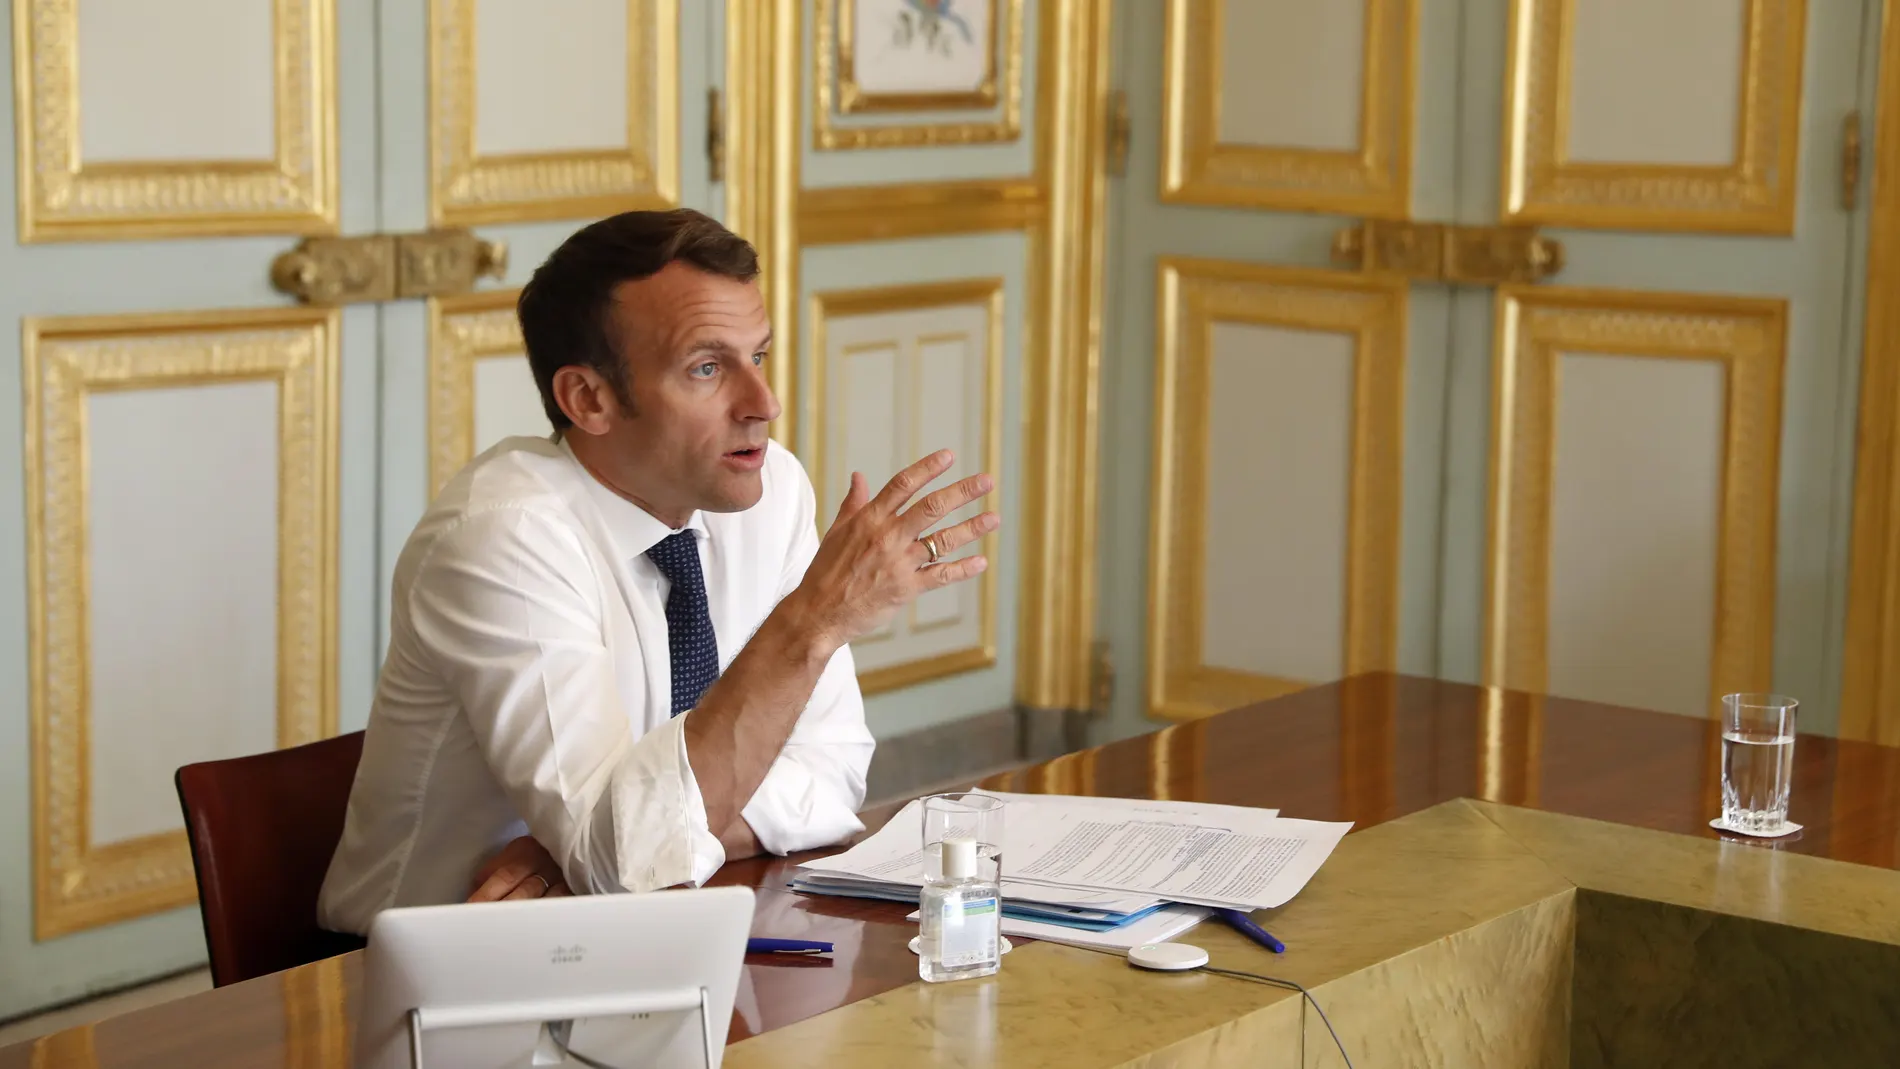 President Macron video conference